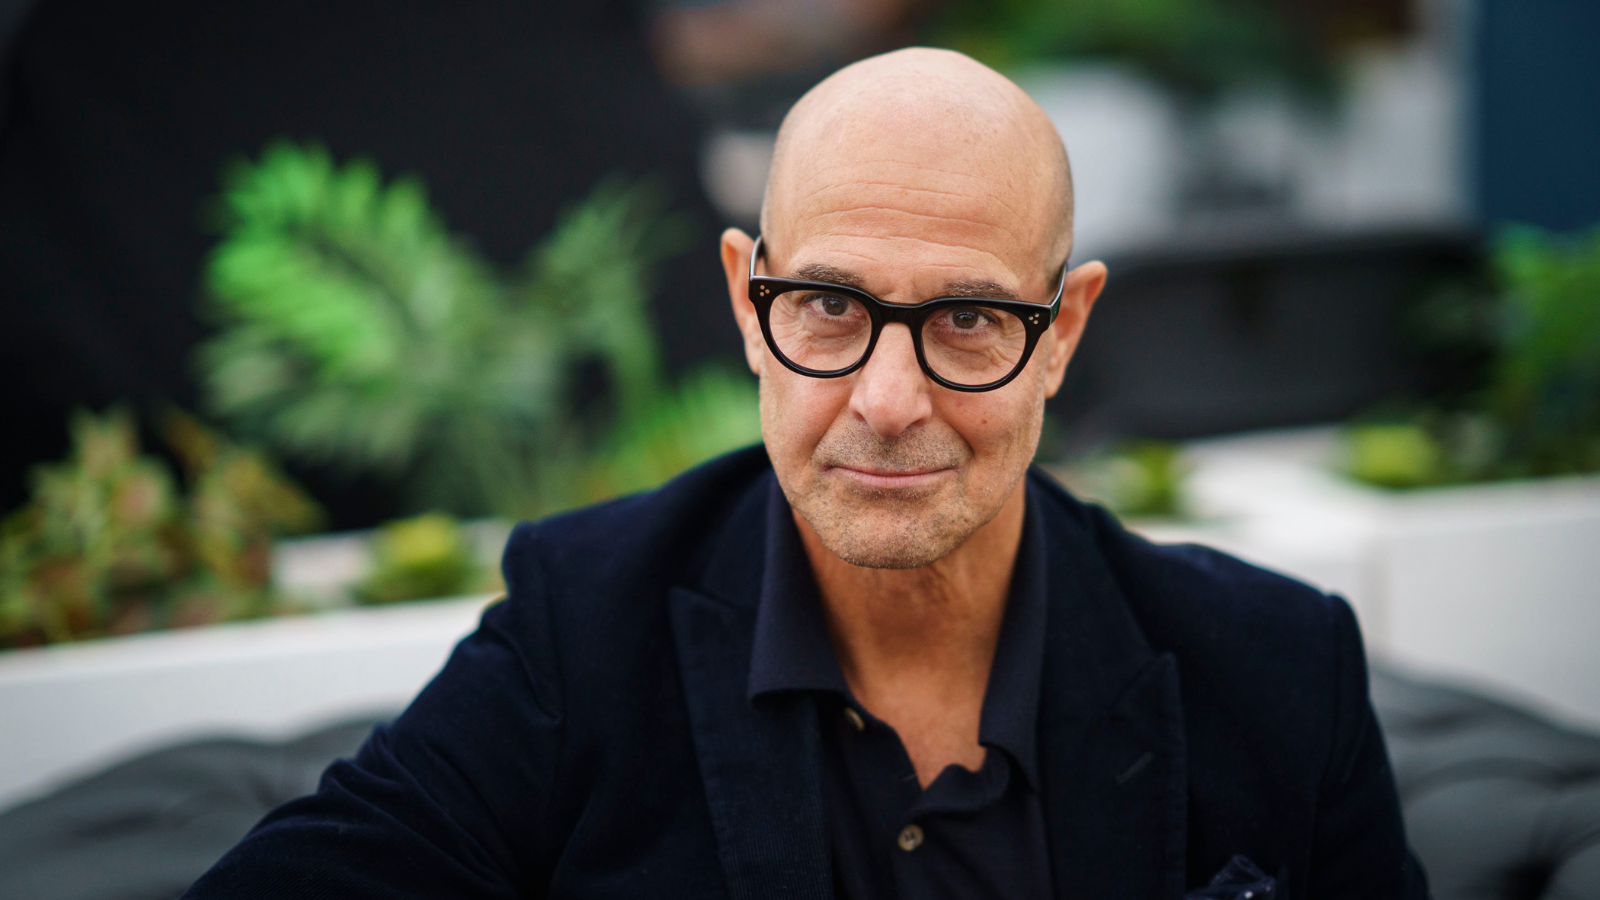 Here's where to buy Stanley Tucci's Le Creuset saucepan